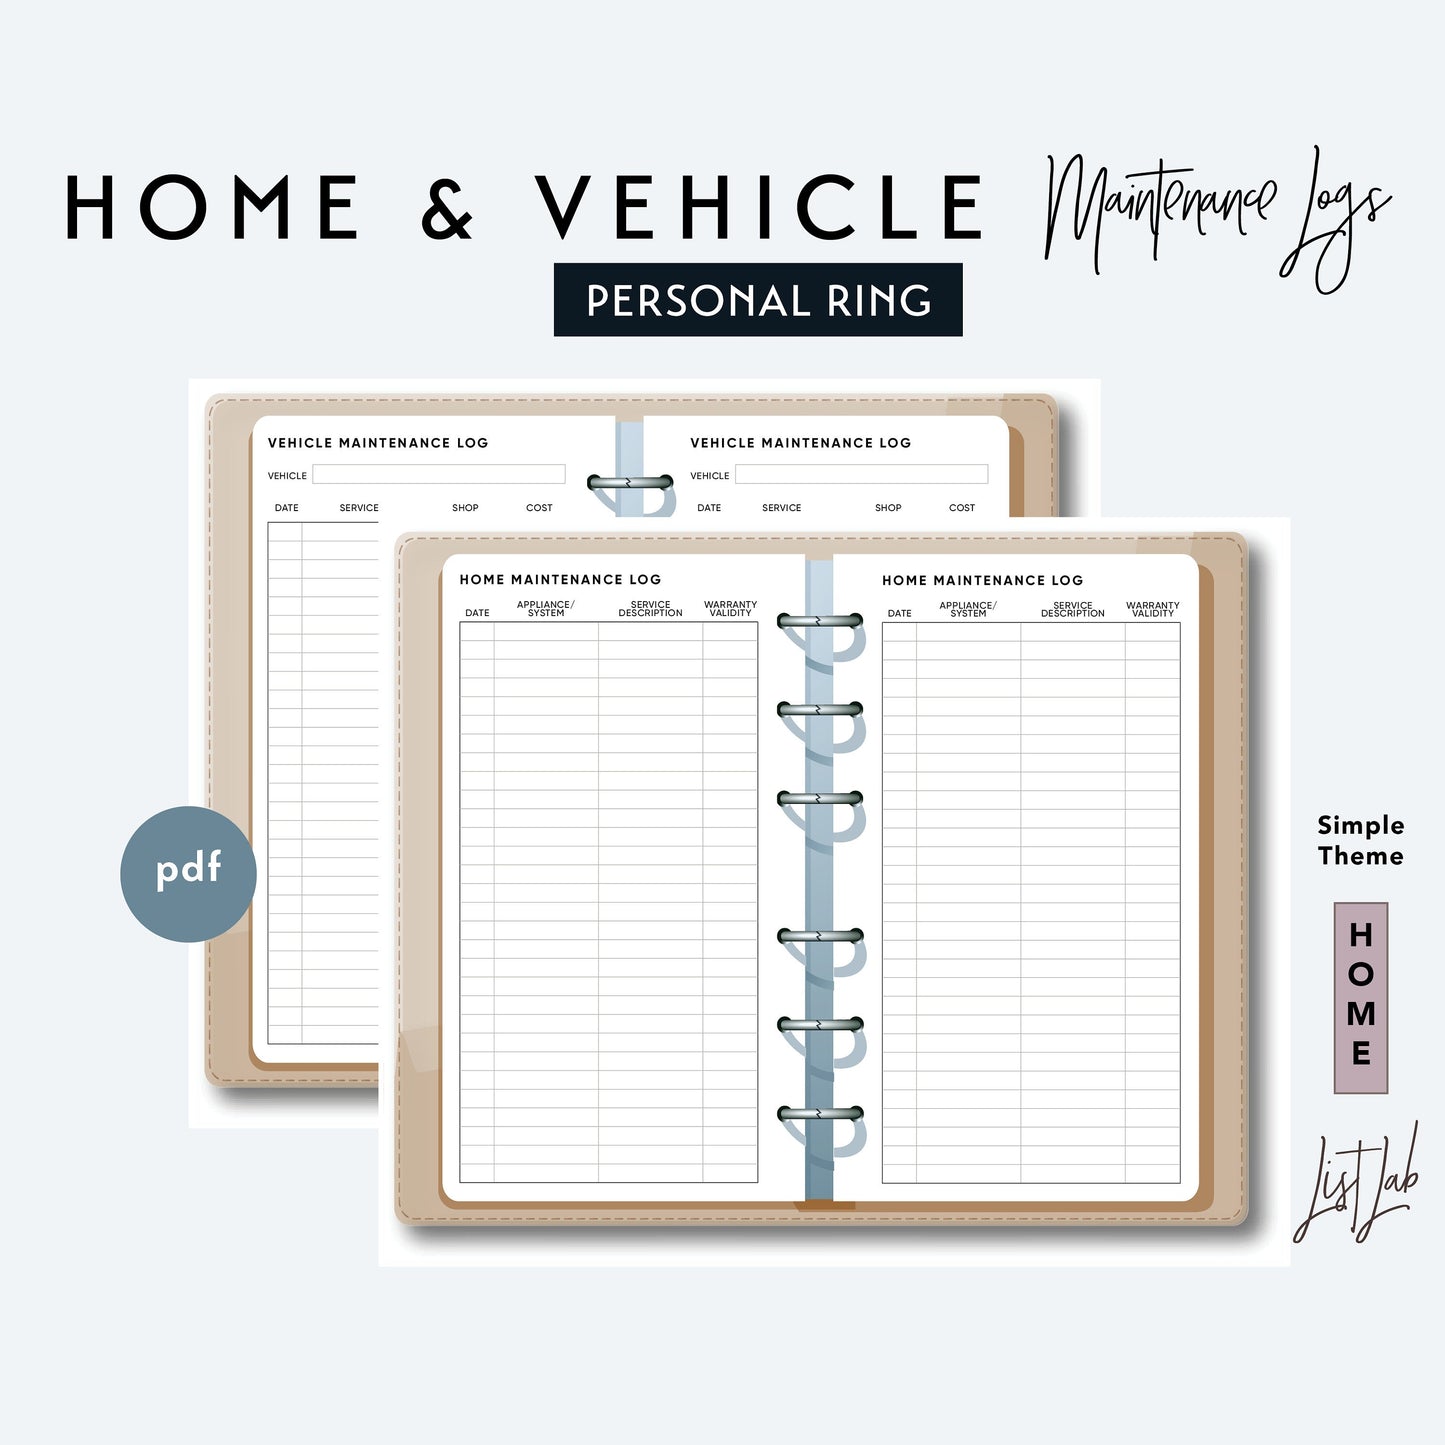 Personal Ring HOME and VEHICLE MAINTENANCE LOGS Printable Insert Set